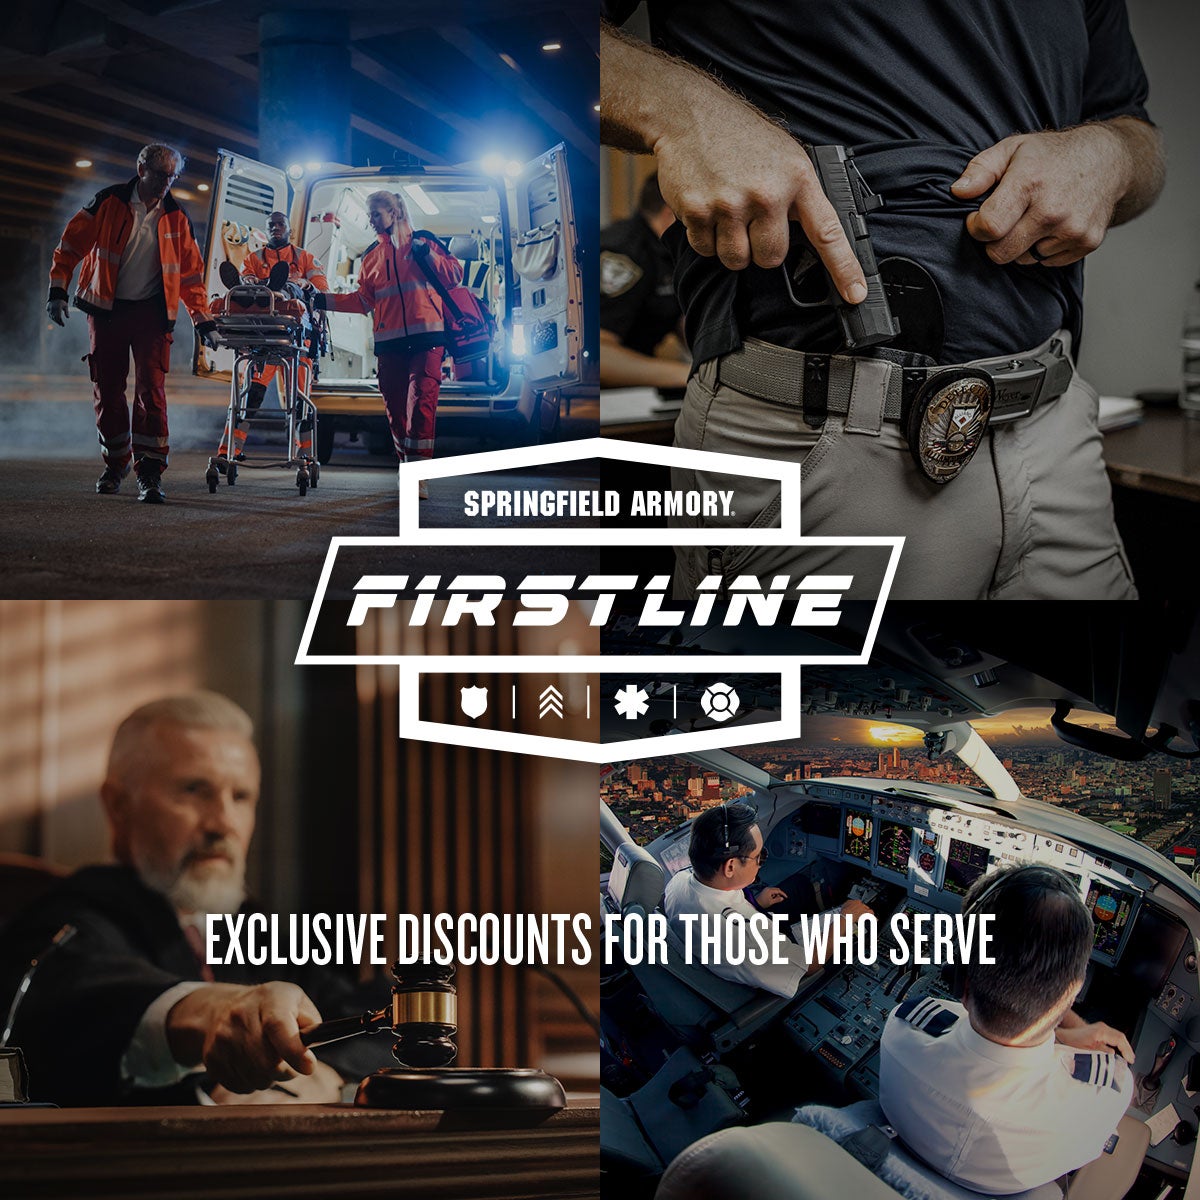 Springfield Armory Firstline – Exclusive Discounts for Those Who Serve